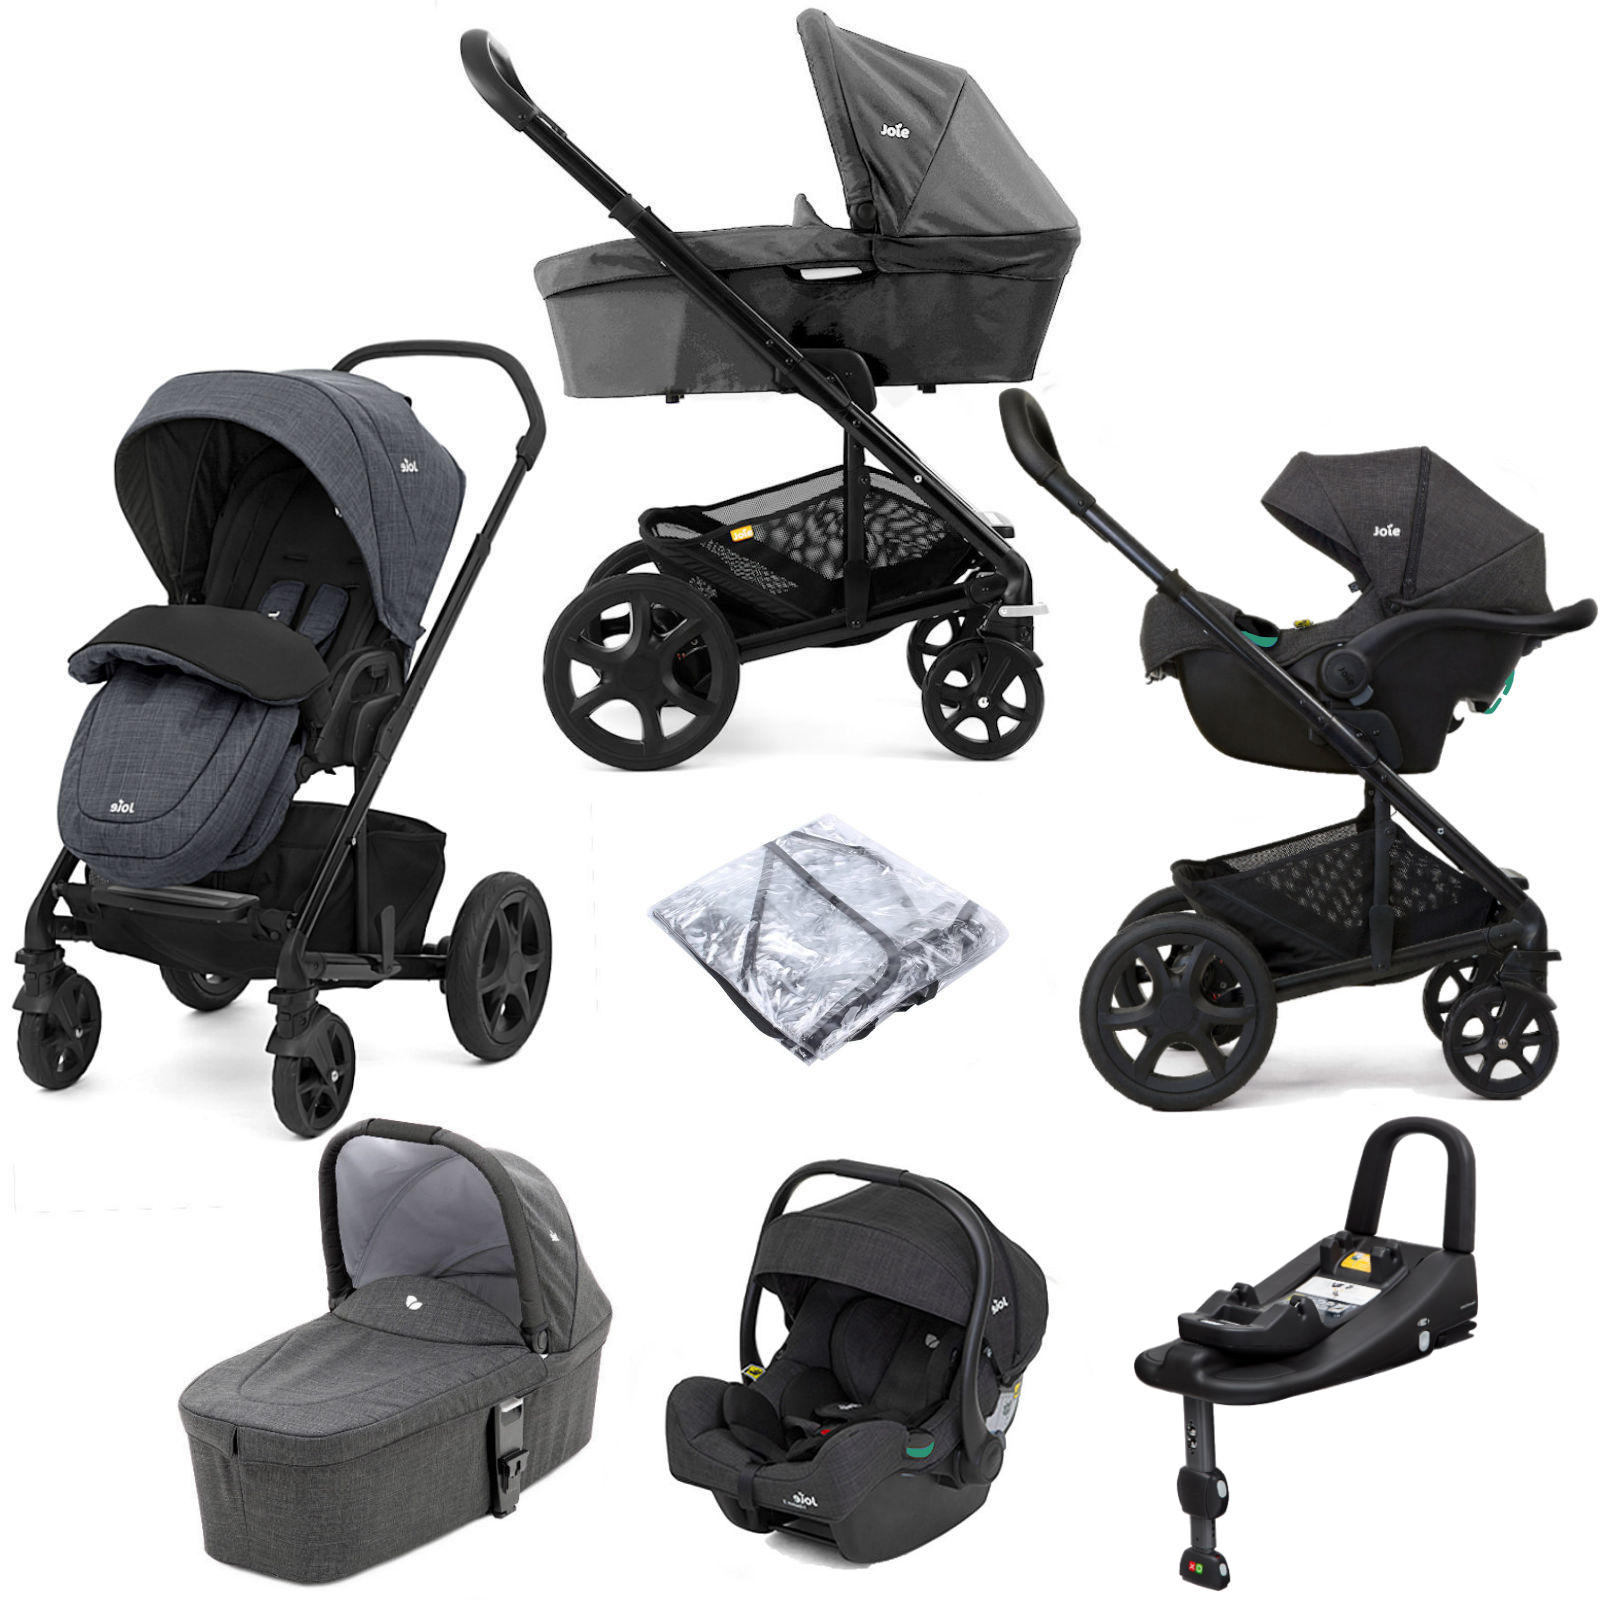 Joie Chrome DLX (i-Gemm 3 Car Seat) Travel System with Carrycot (inc Footmuff) & ISOFIX Base - Pavement